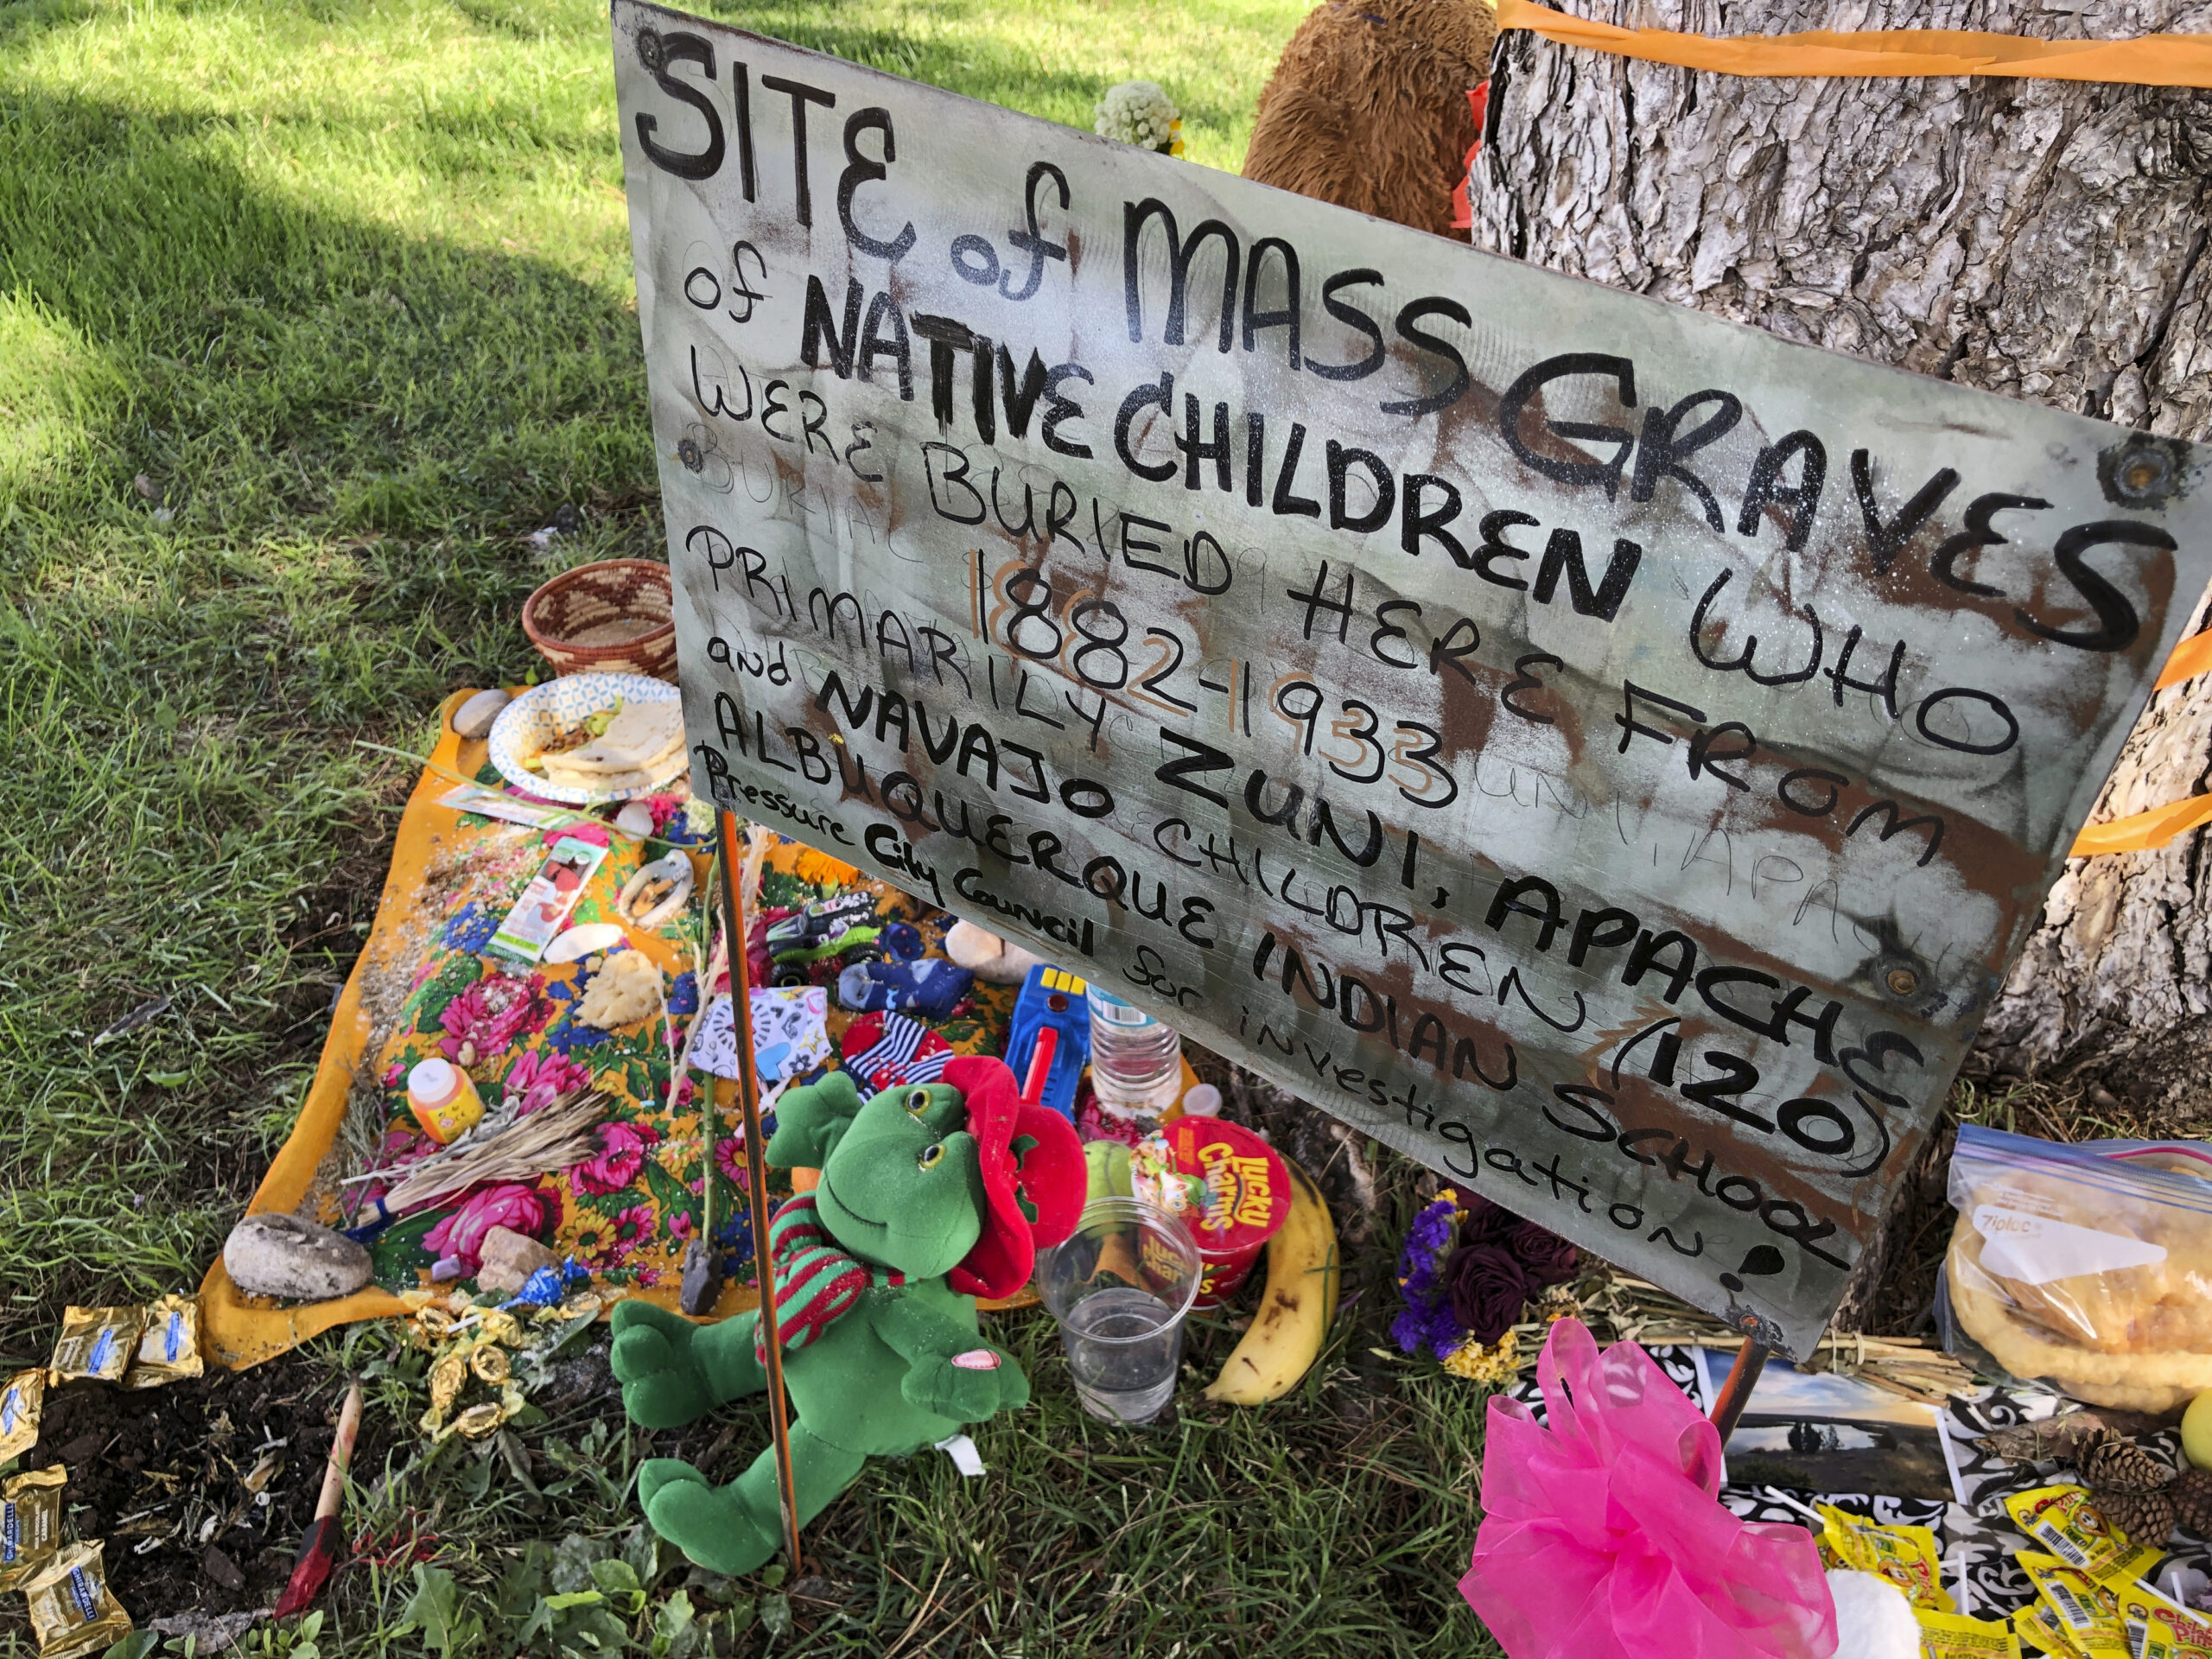 A makeshift memorial for the dozens of Indigenous children who died more than a century ago while attending a boarding school that was once located nearby is displayed under a tree at a public park in Albuquerque, New Mexico, on July 1, 2021. The U.S. Interior Department released a report May 11, 2022, about the federal government's past oversight of Native American boarding schools. (AP Photo/Susan Montoya Bryan, File)